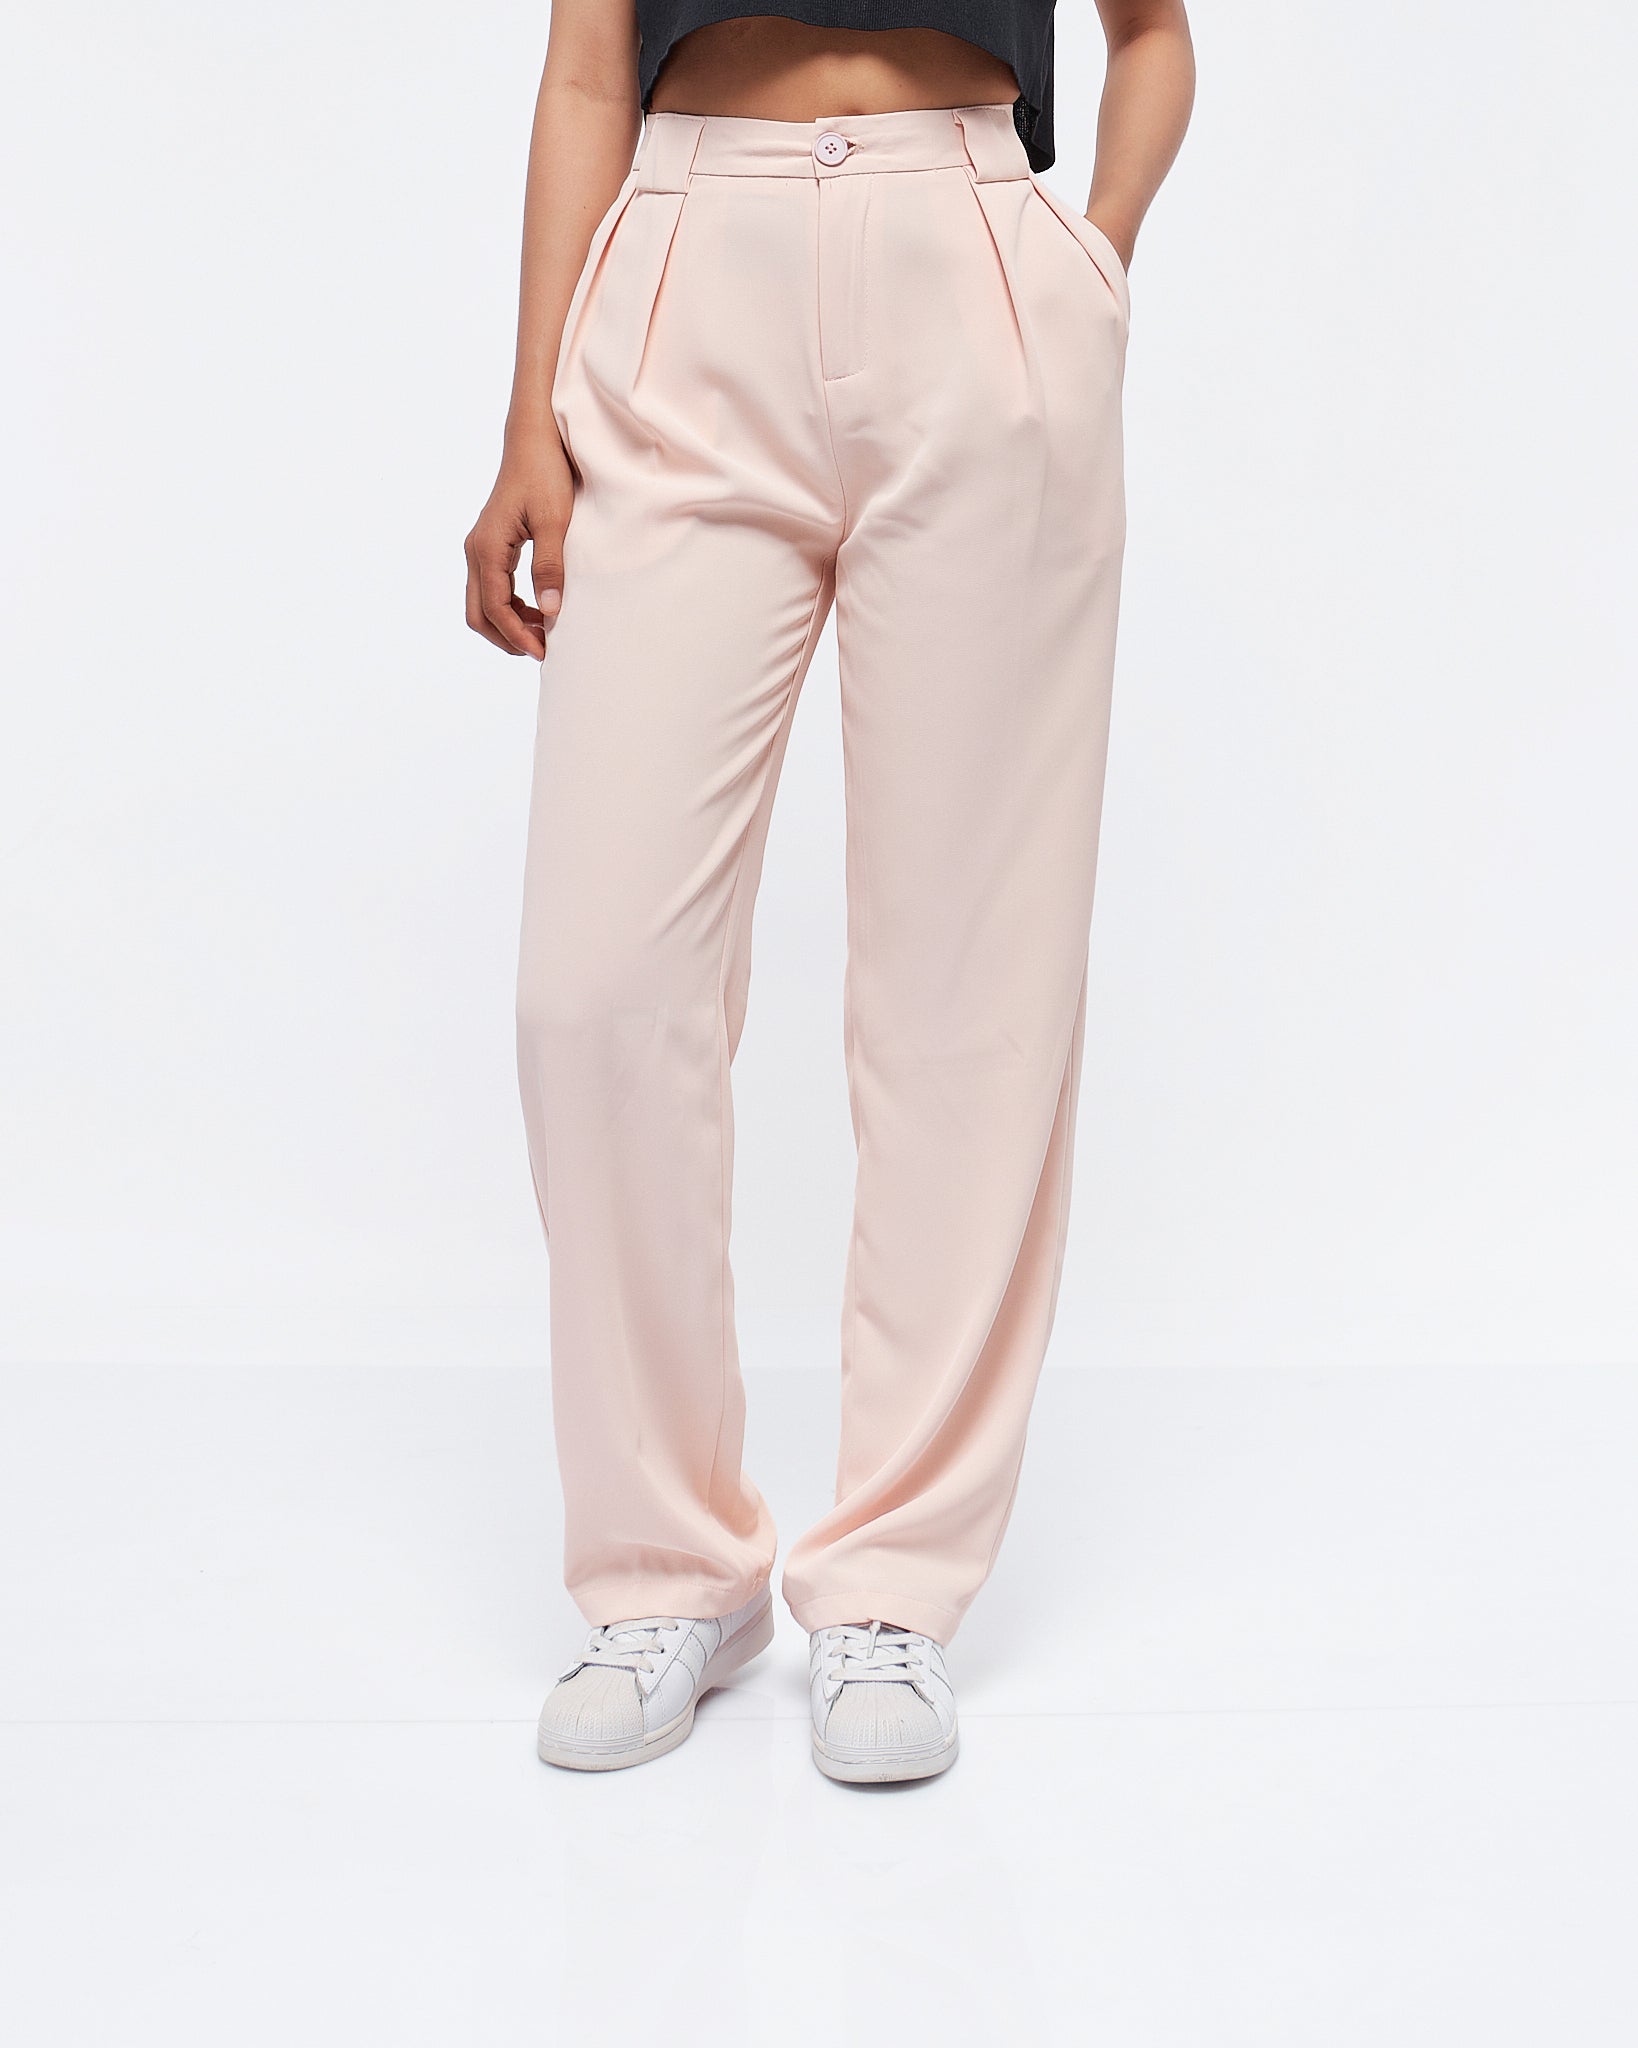 MOI OUTFIT-High Waist Front Button Lady Pants 23.90